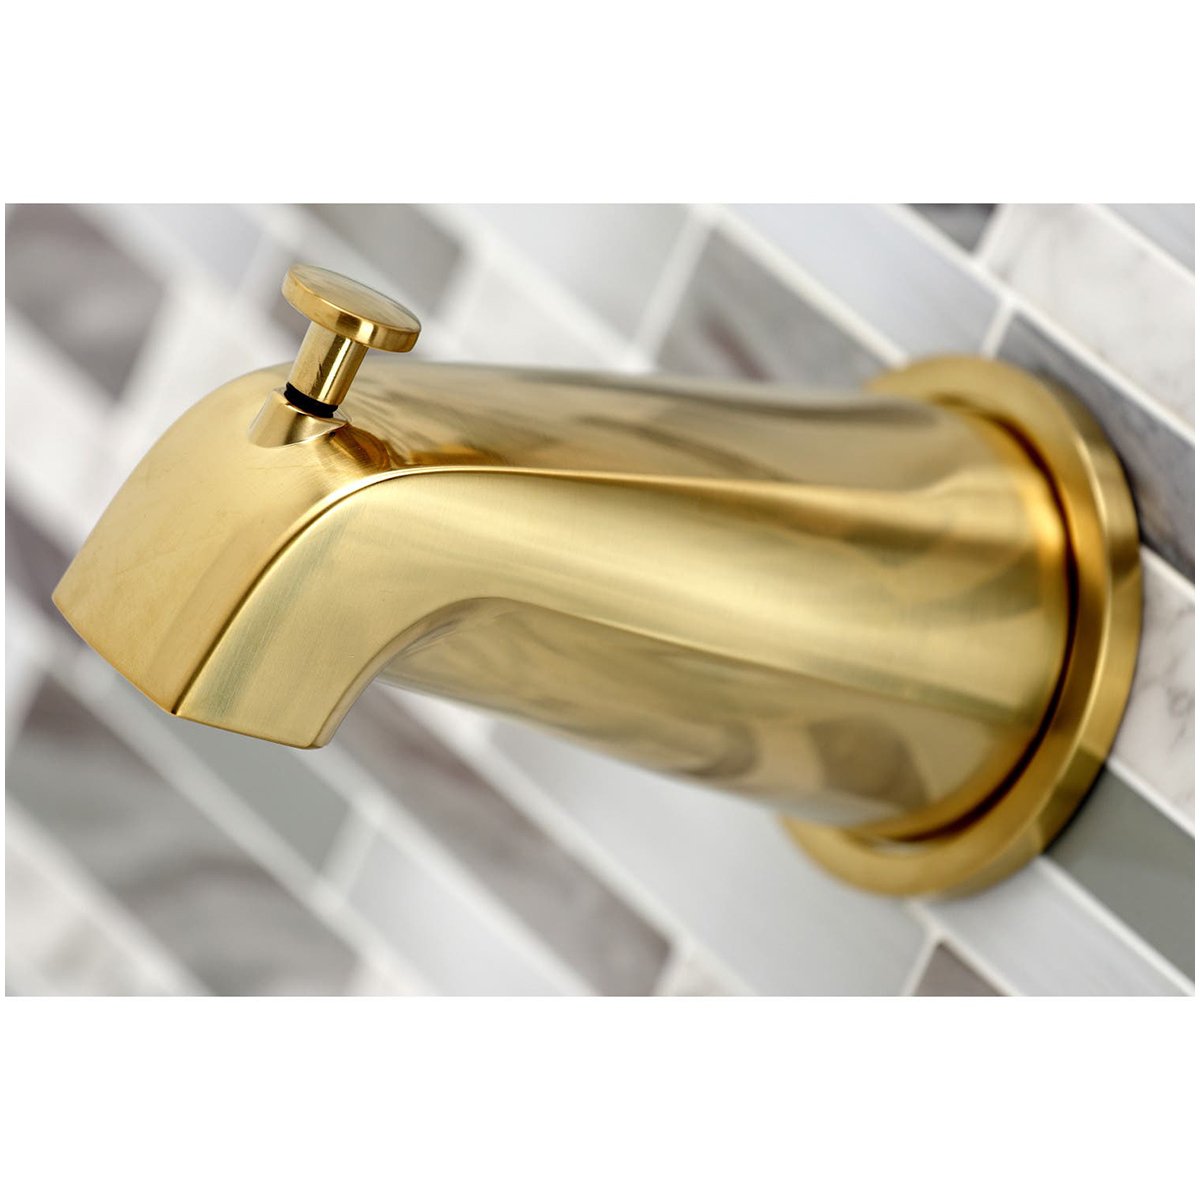 Kingston Brass Centurion Two-Handle Tub and Shower Faucet